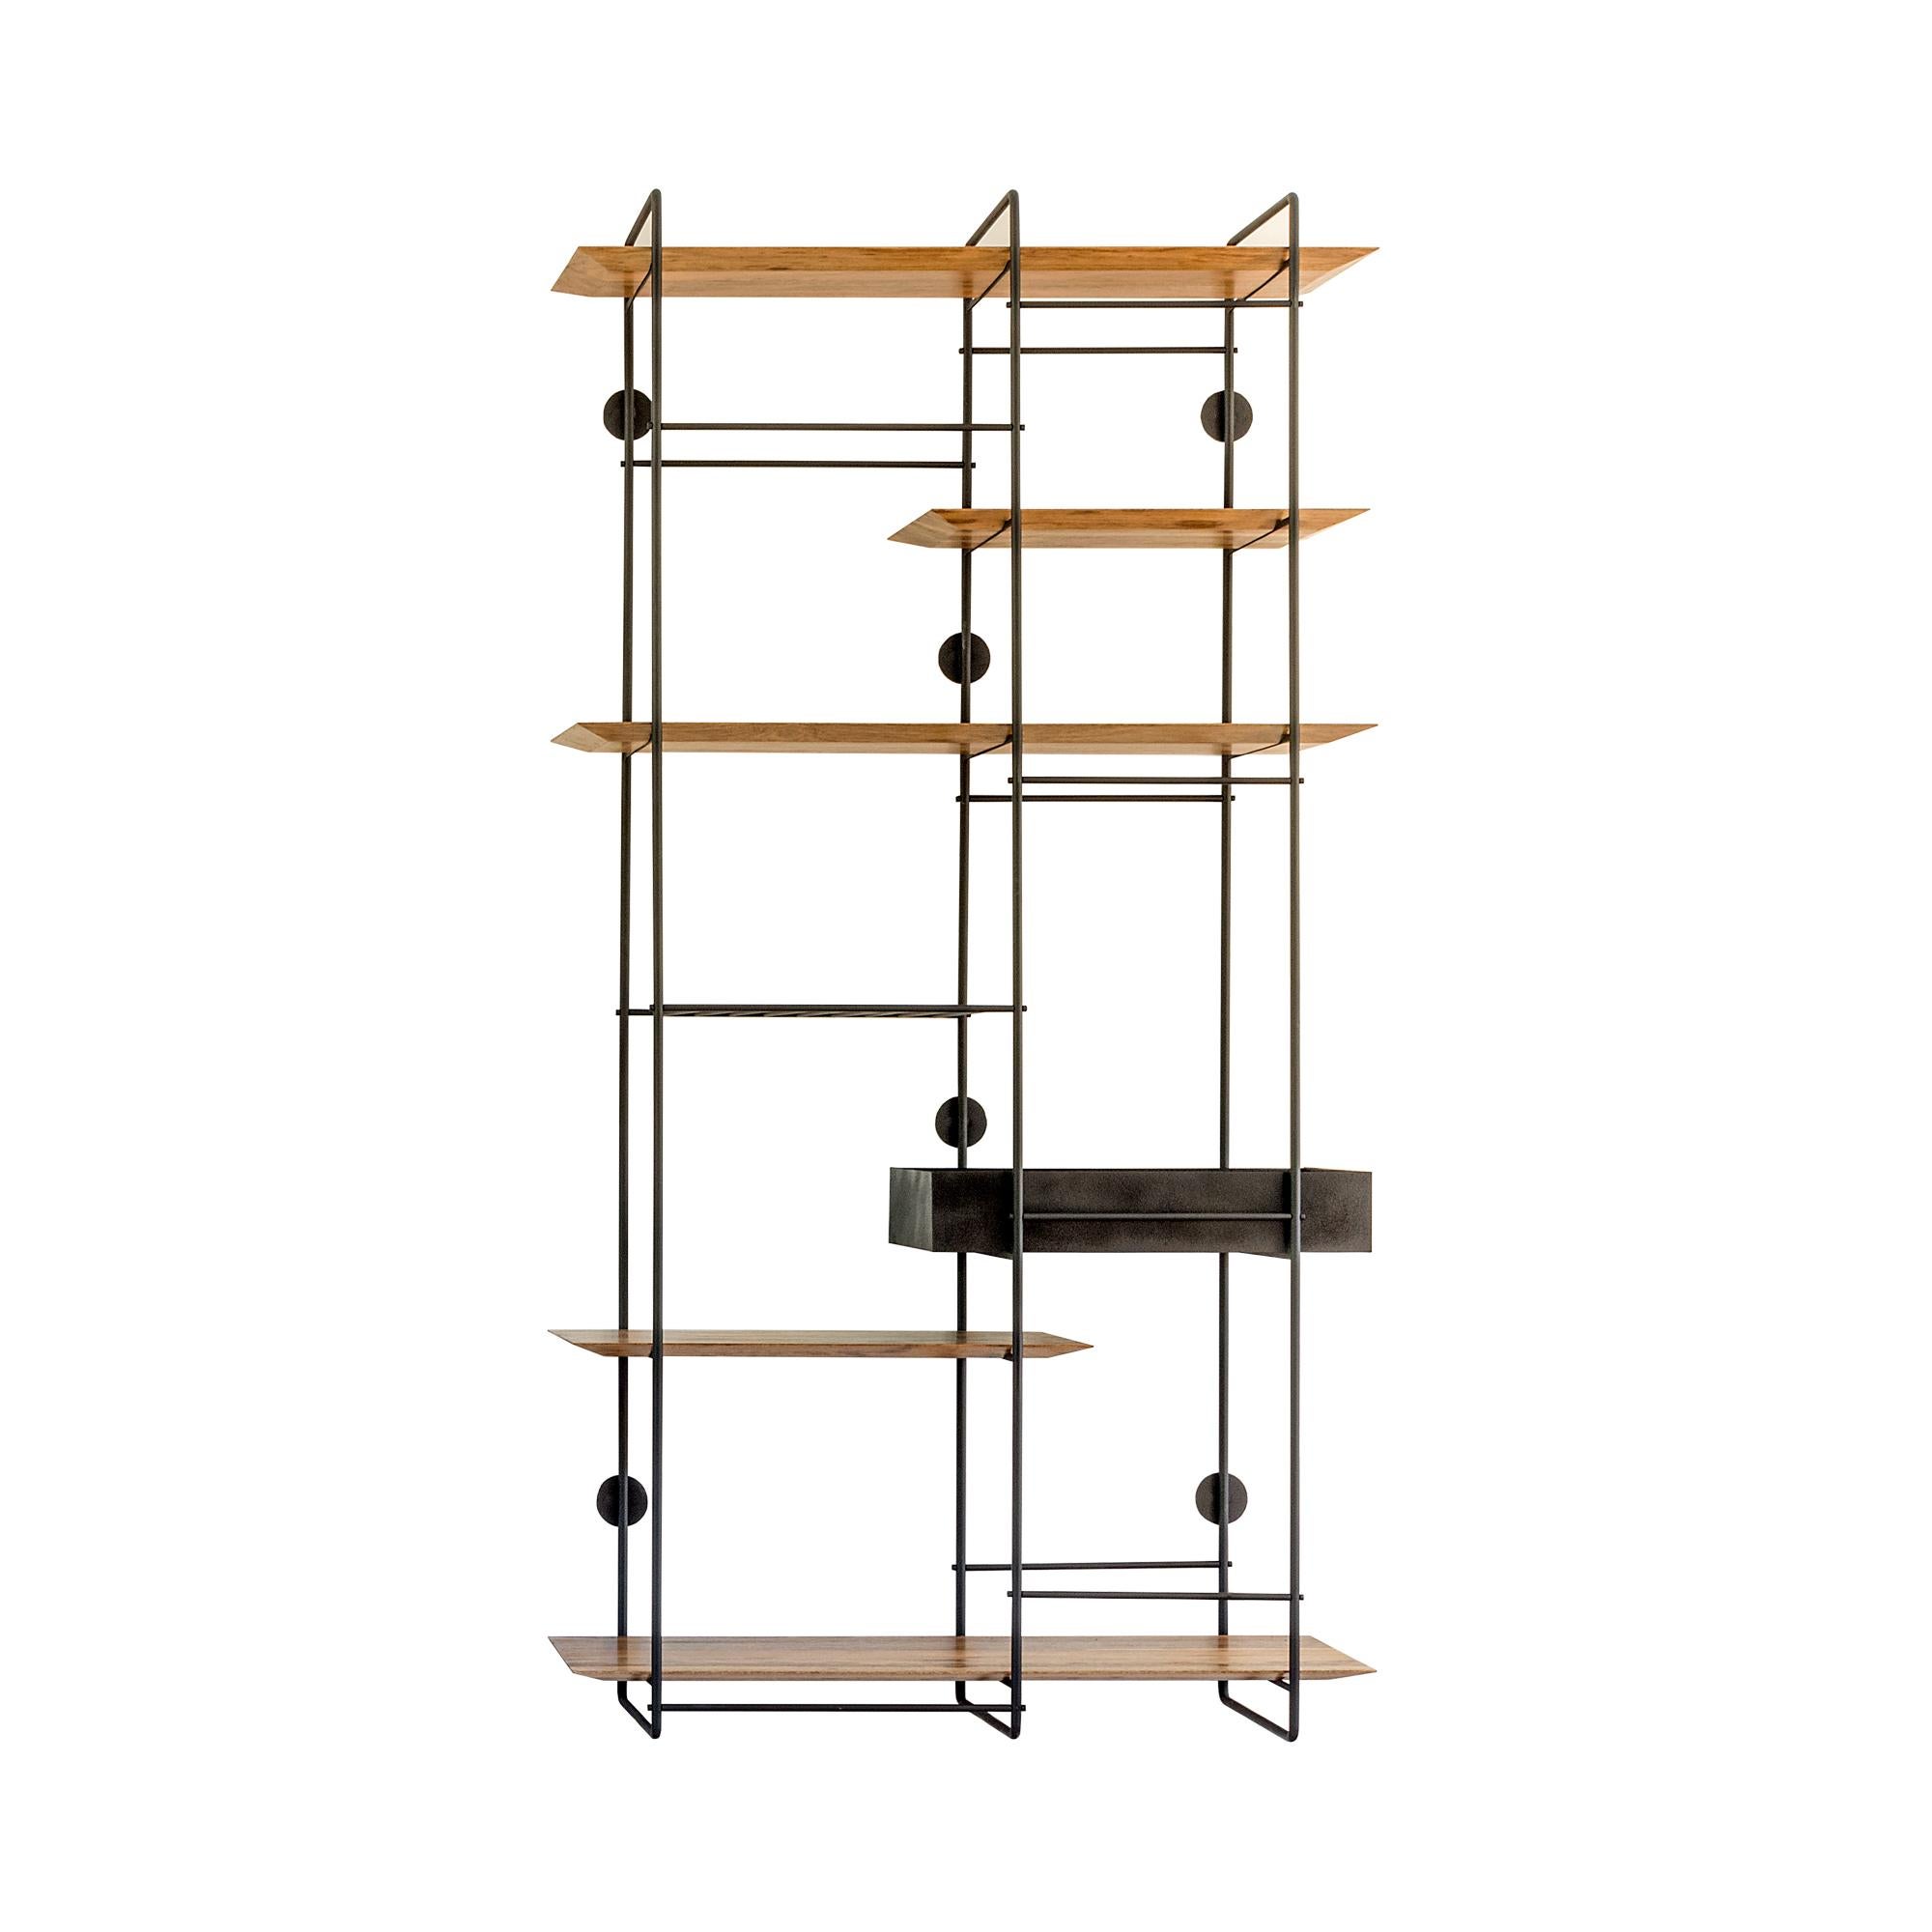 "Dots 5 box" Minimalist Floating Shelf Unit in Stainless Steel and Hardwood For Sale